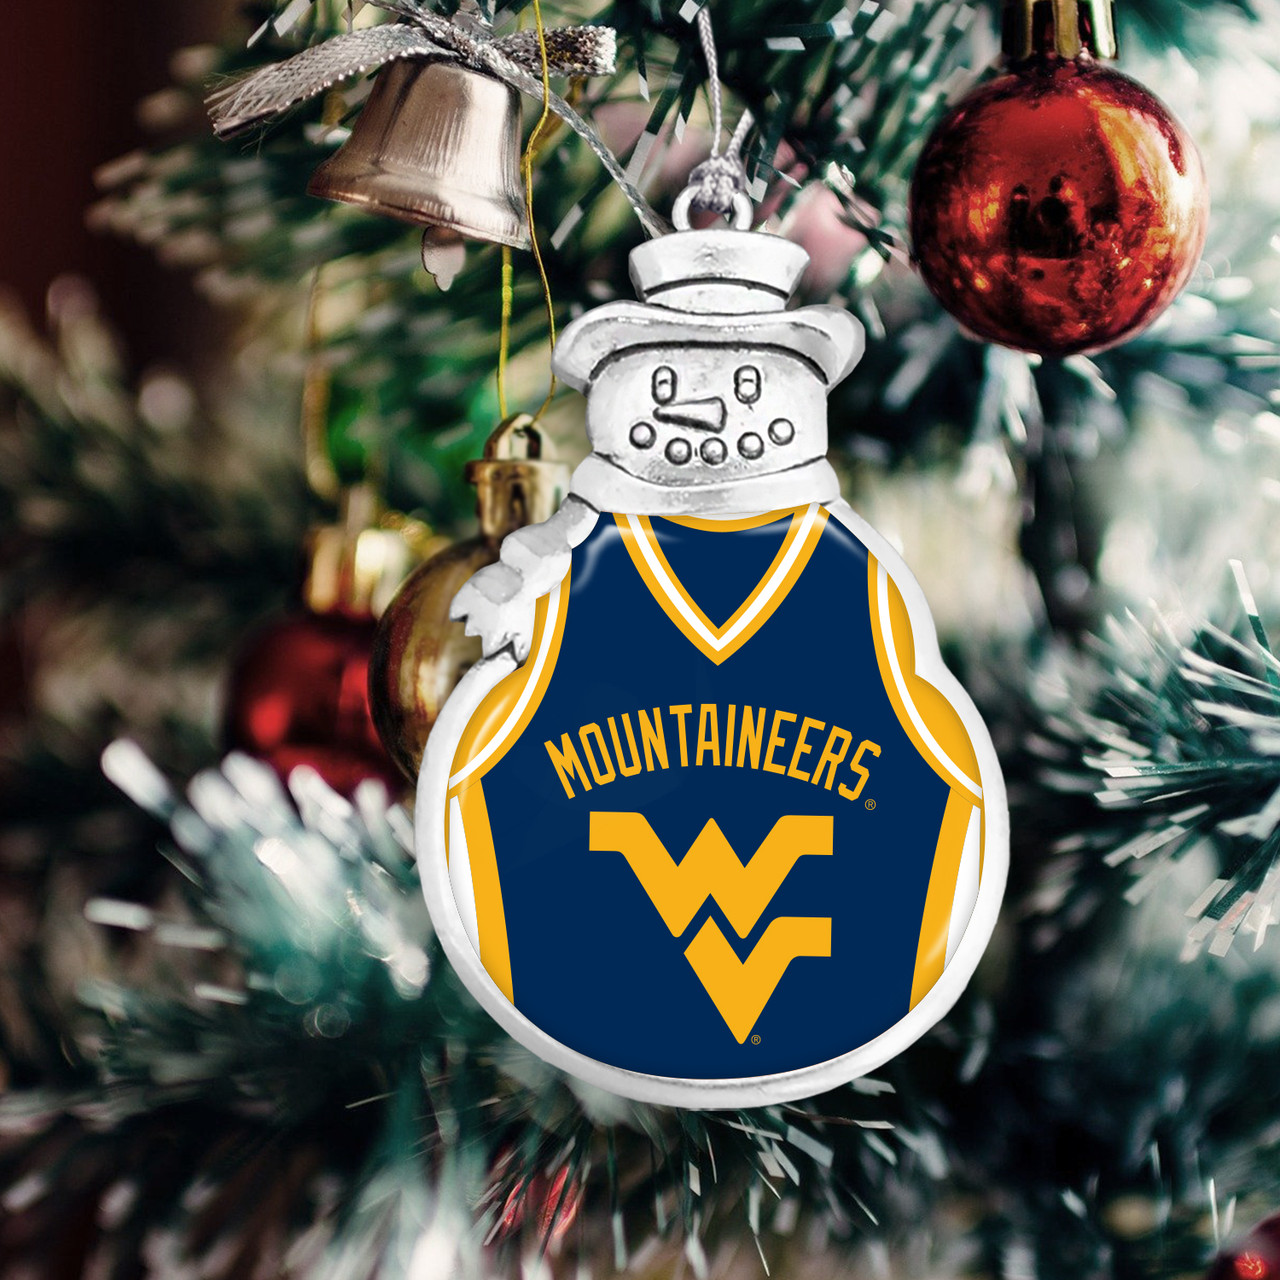 West Virginia Mountaineers Snowman Ornament with Basketball Jersey